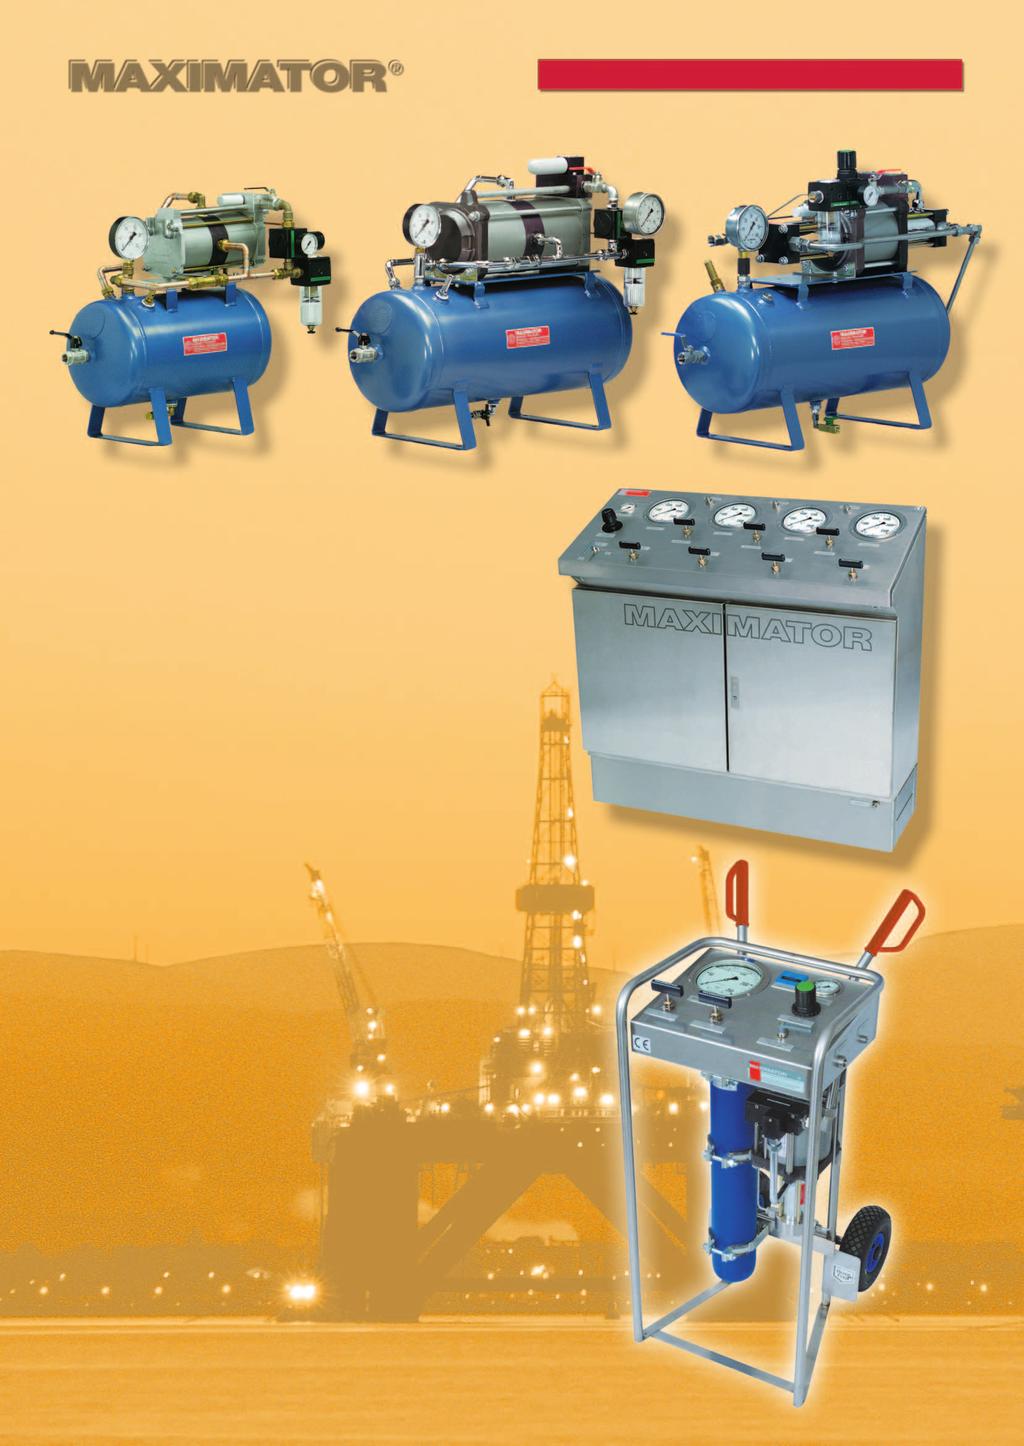 MAXIMATOR Air Driven Air Amplifiers and Gas Boosters, Power Units and Test Systems 4 lines of air driven air amplifiers Pressures from 1 bar (14 psi) up to 50 bar (715 psi).